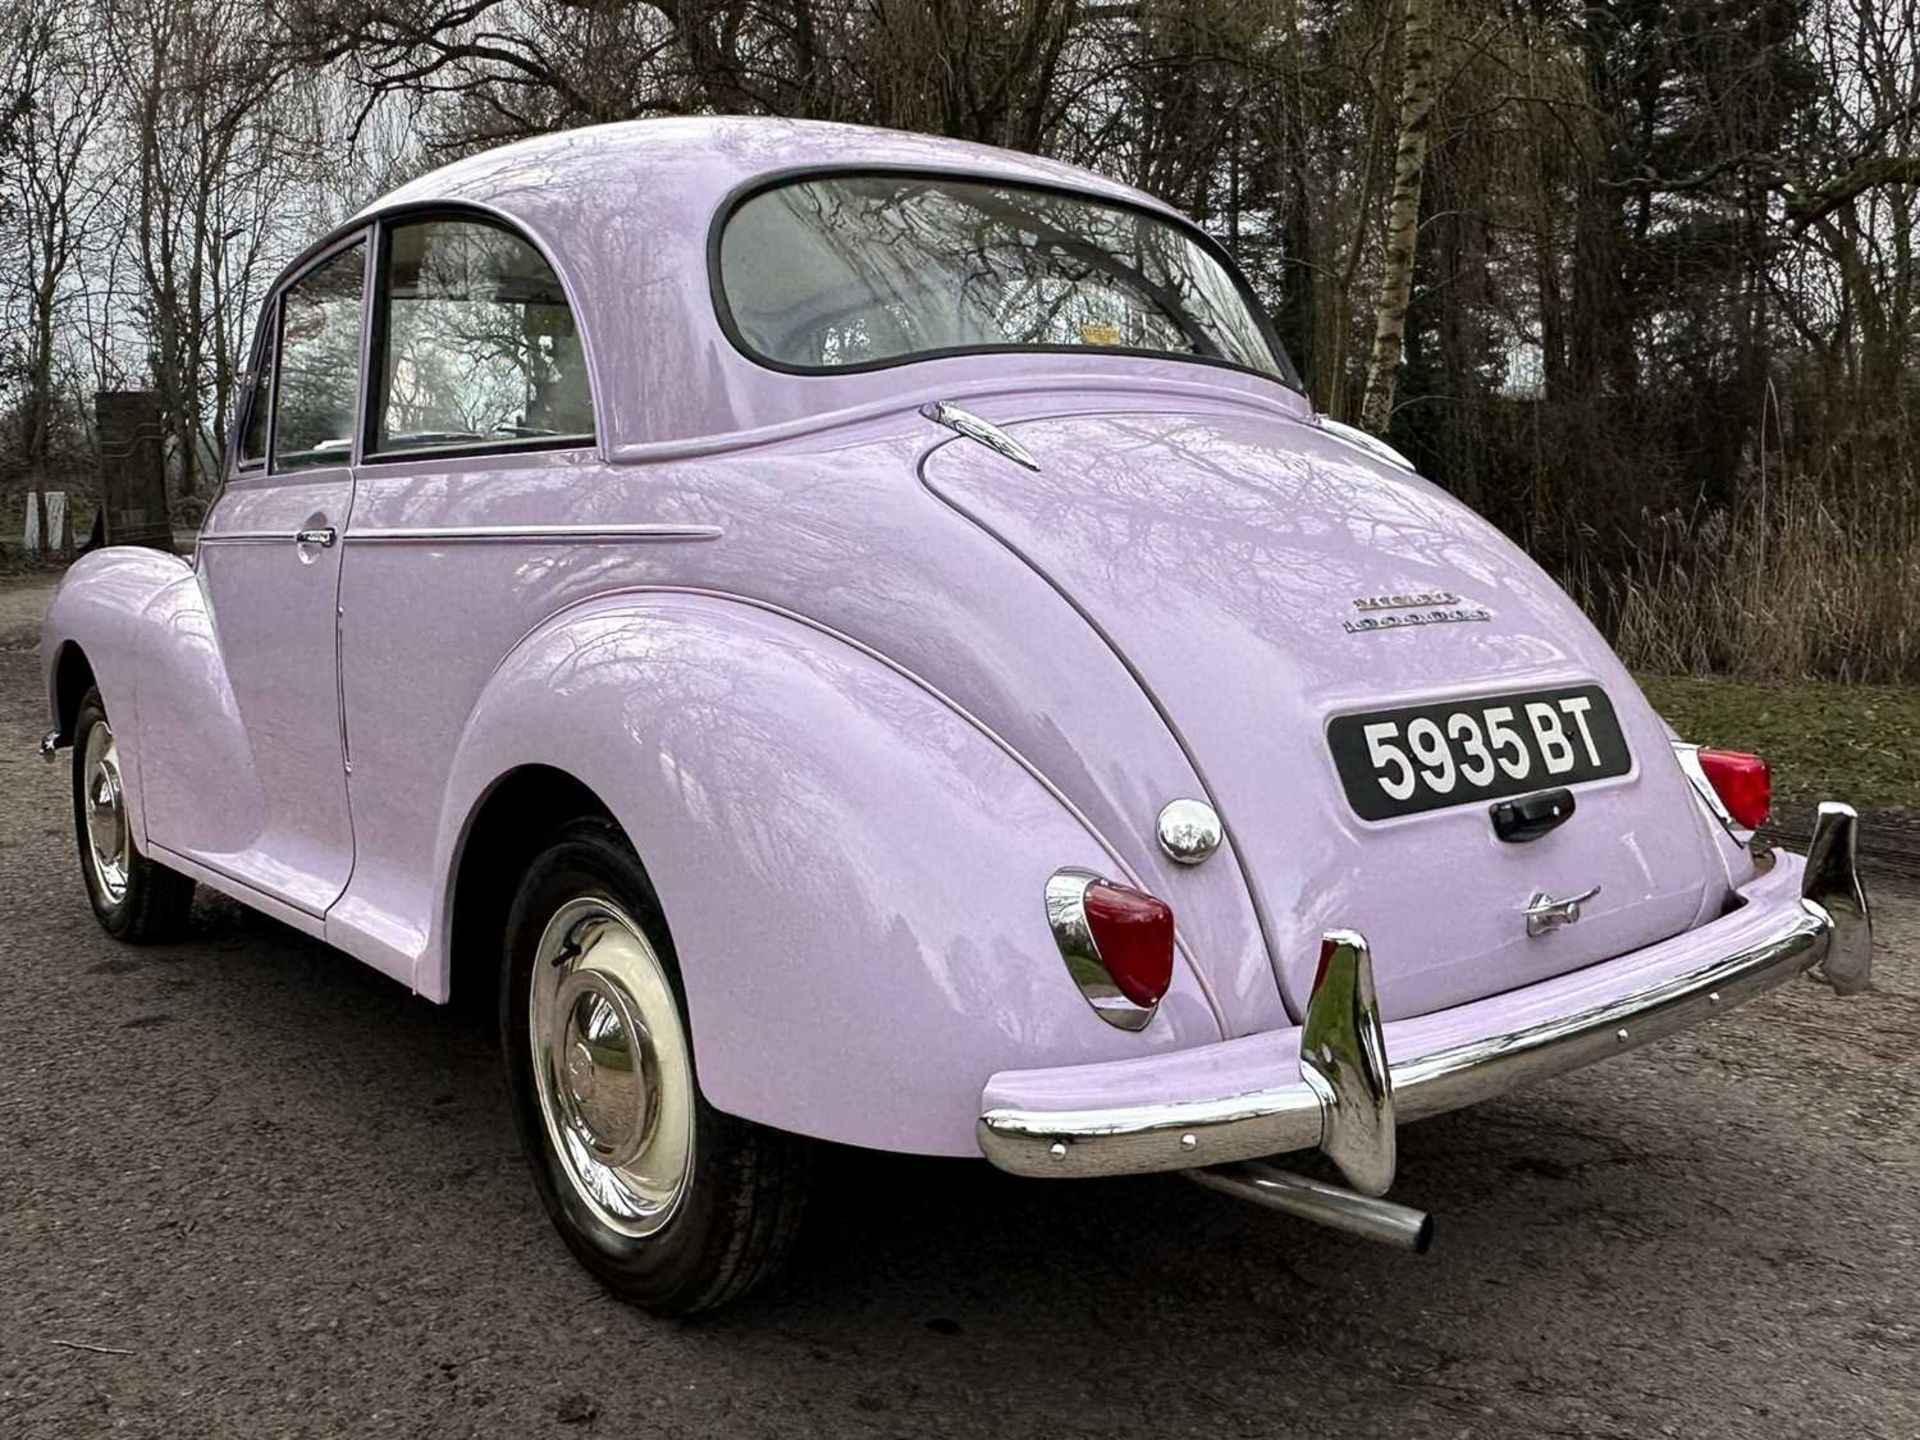 1961 Morris Minor Million 179 of 350 built, fully restored, only three owners from new - Image 24 of 100